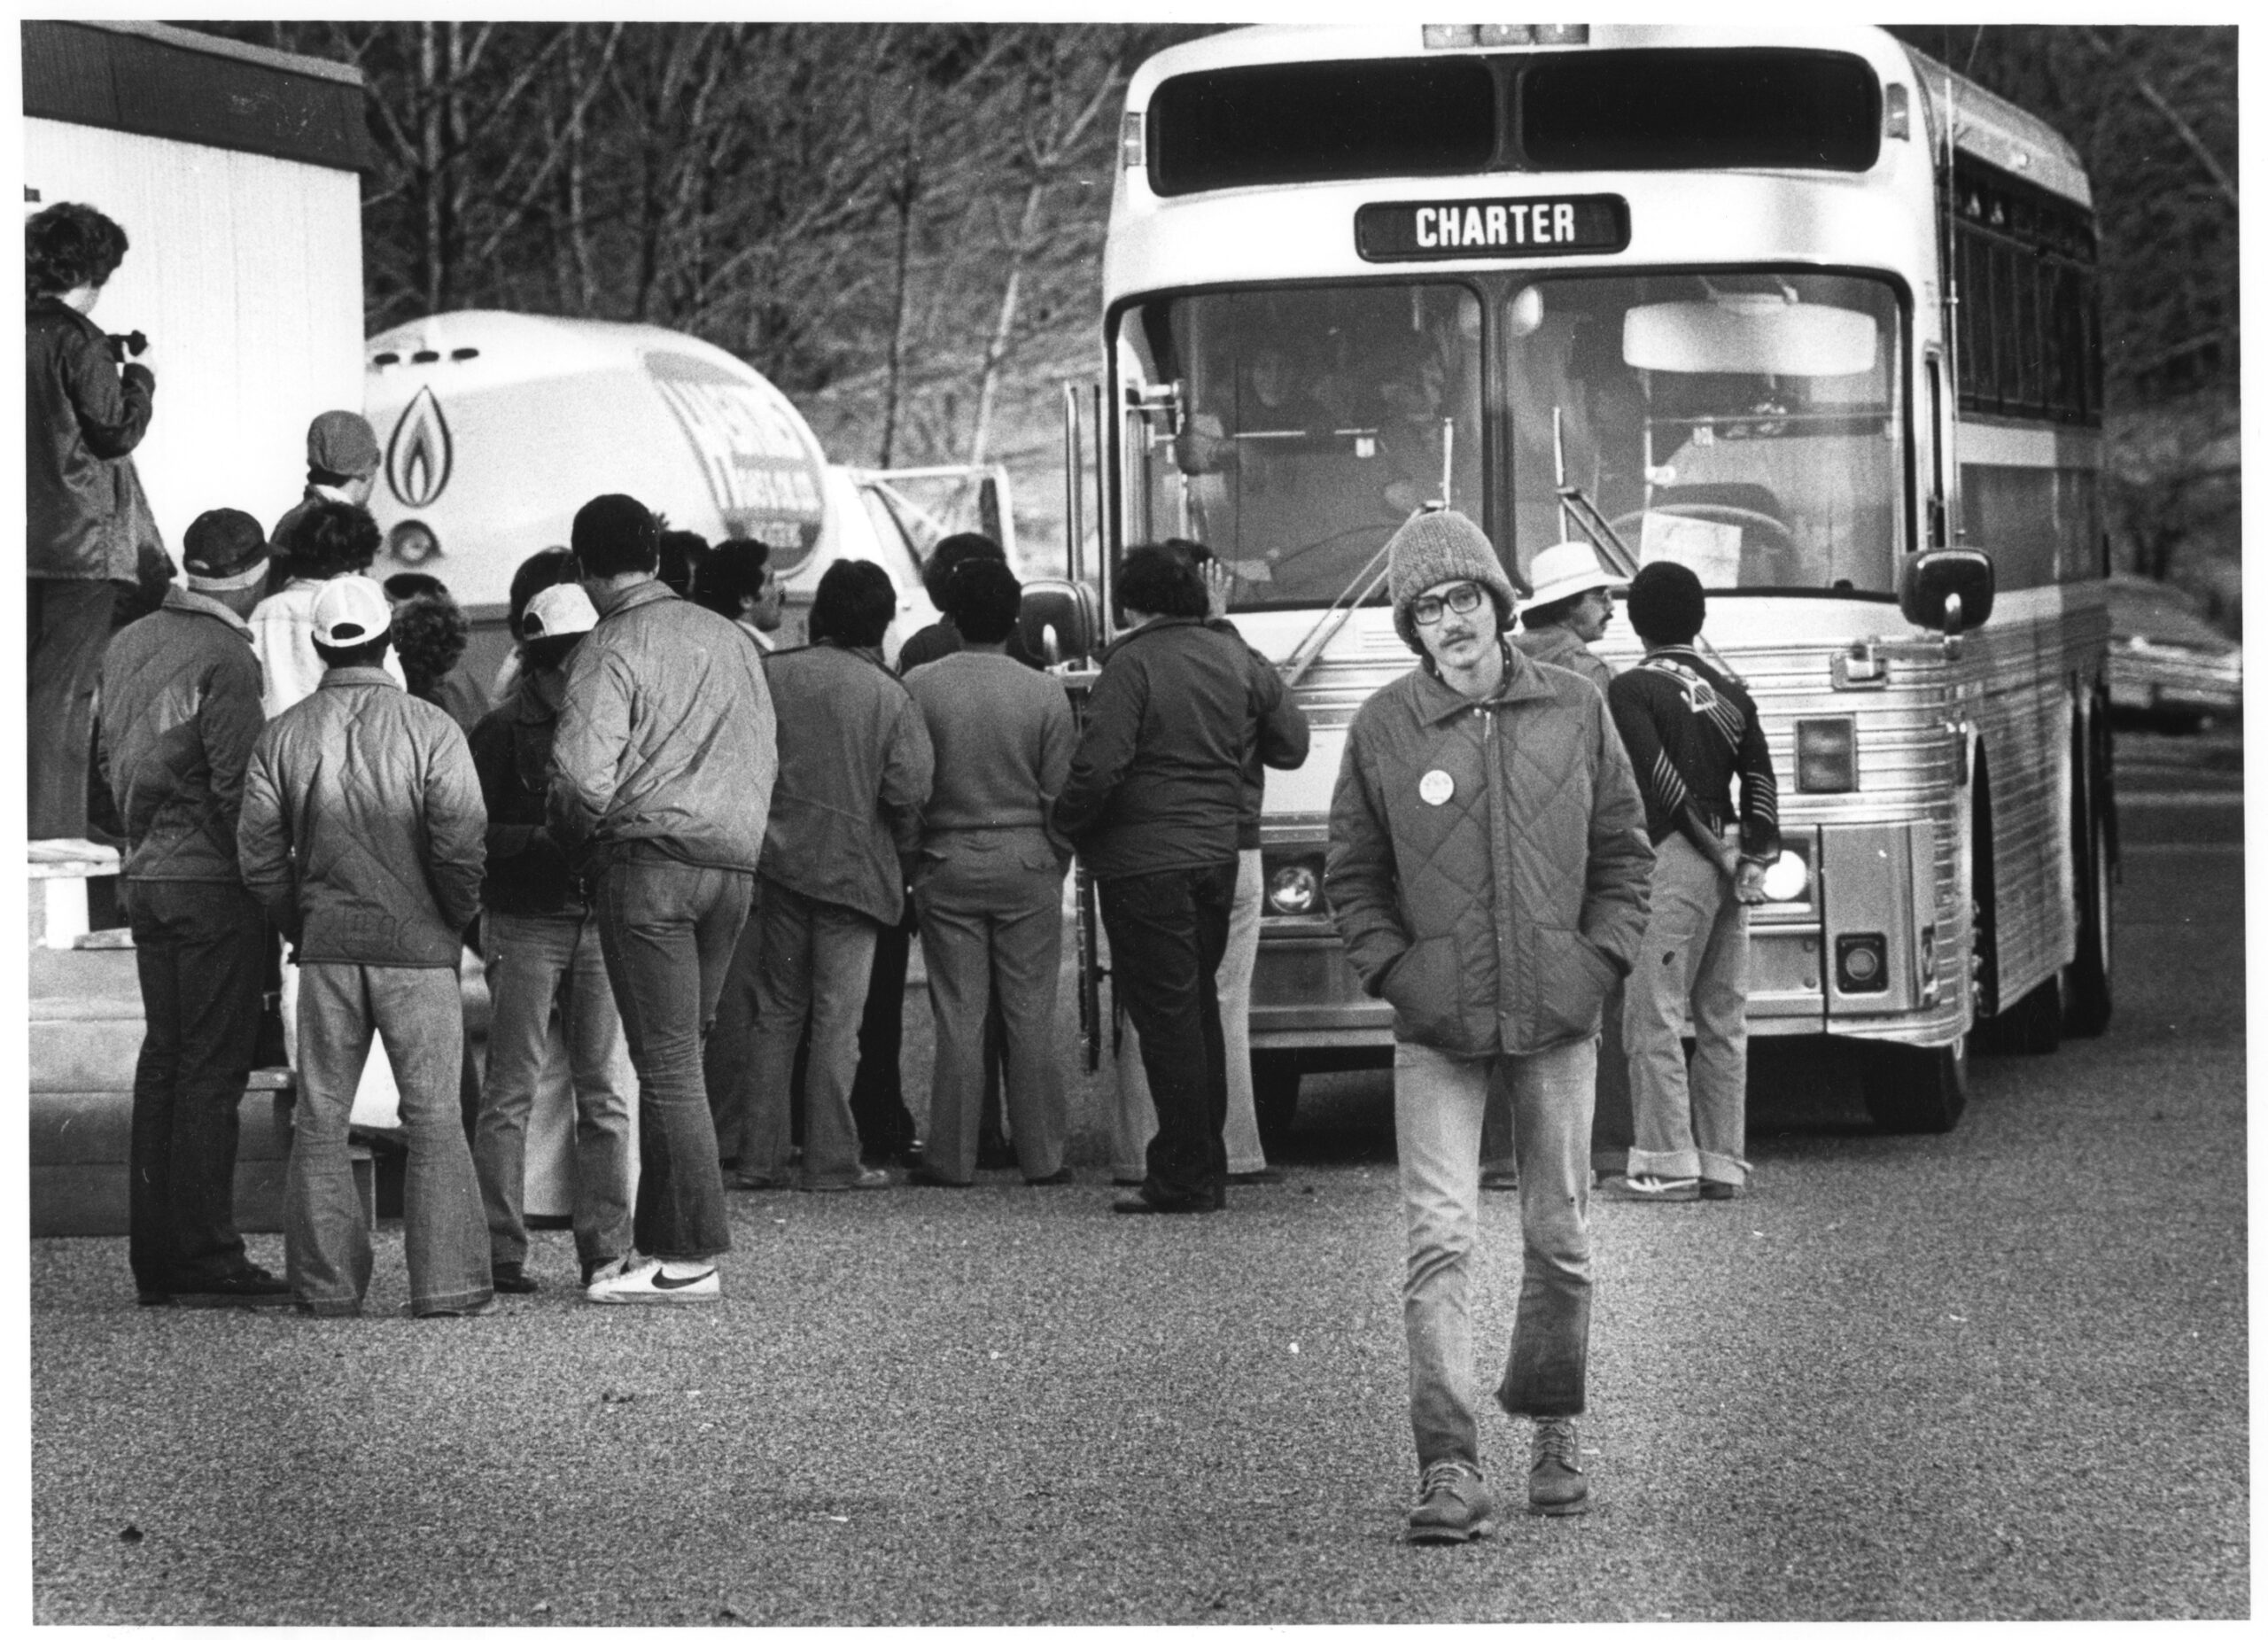 A black and white photograph featuring unidentified refugees gathered near a bus